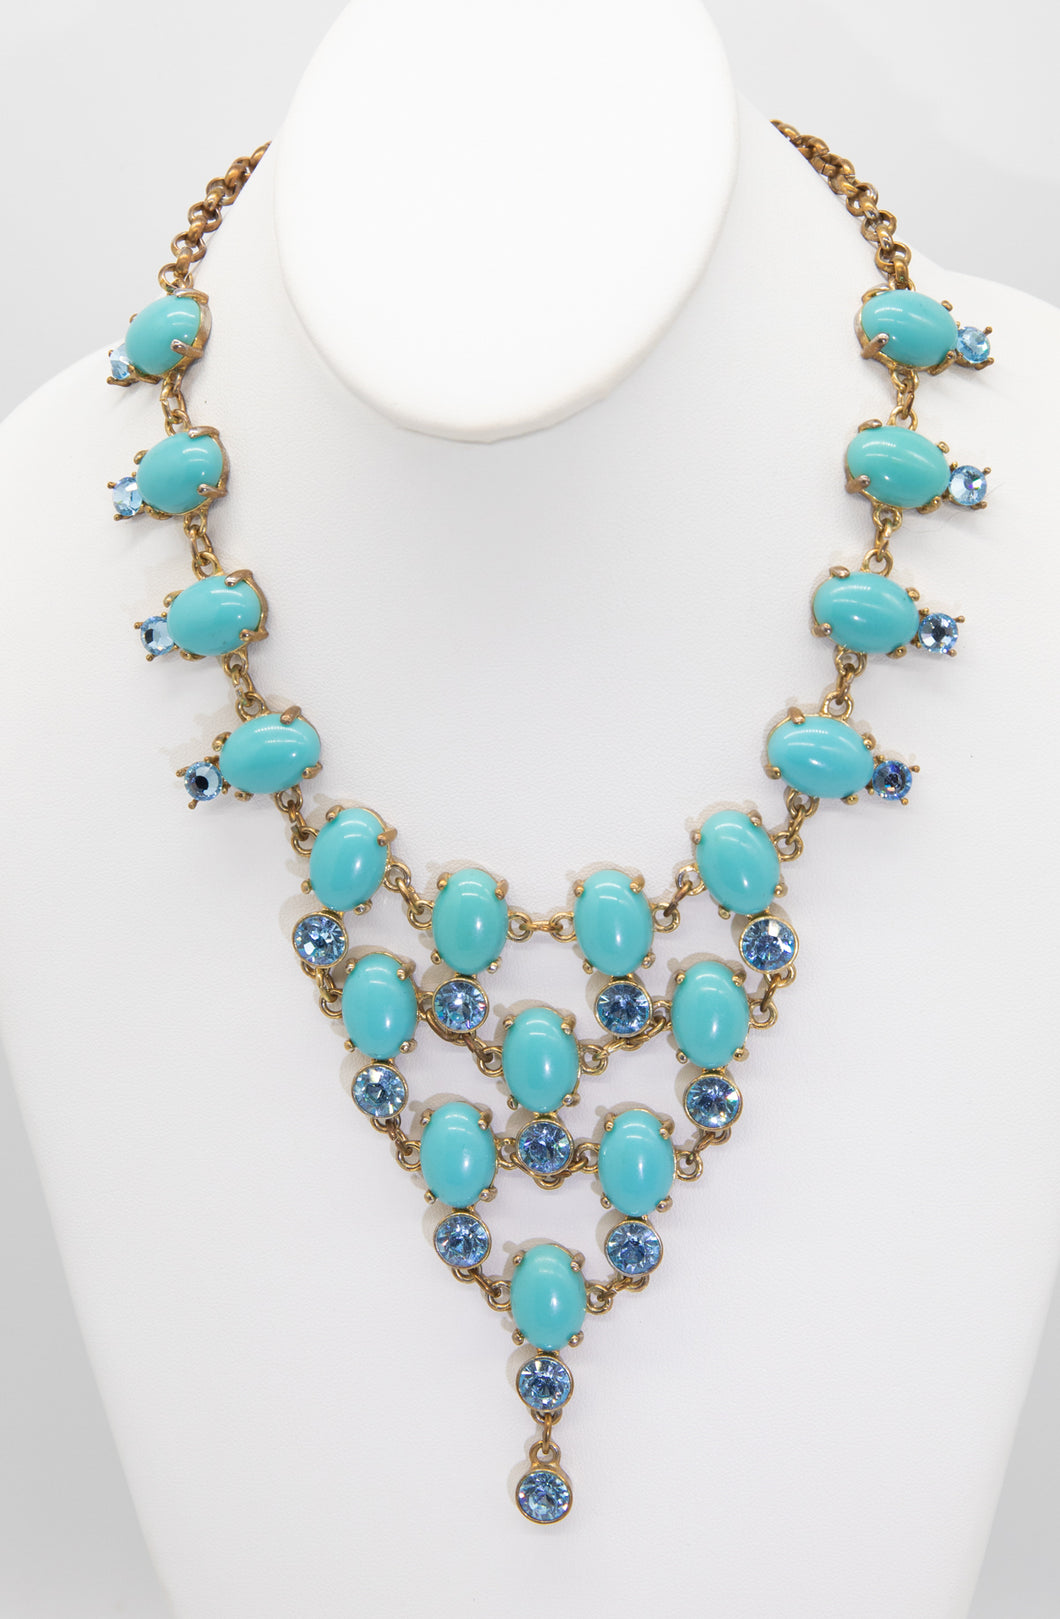 Vintage Turquoise Necklace - JD10754